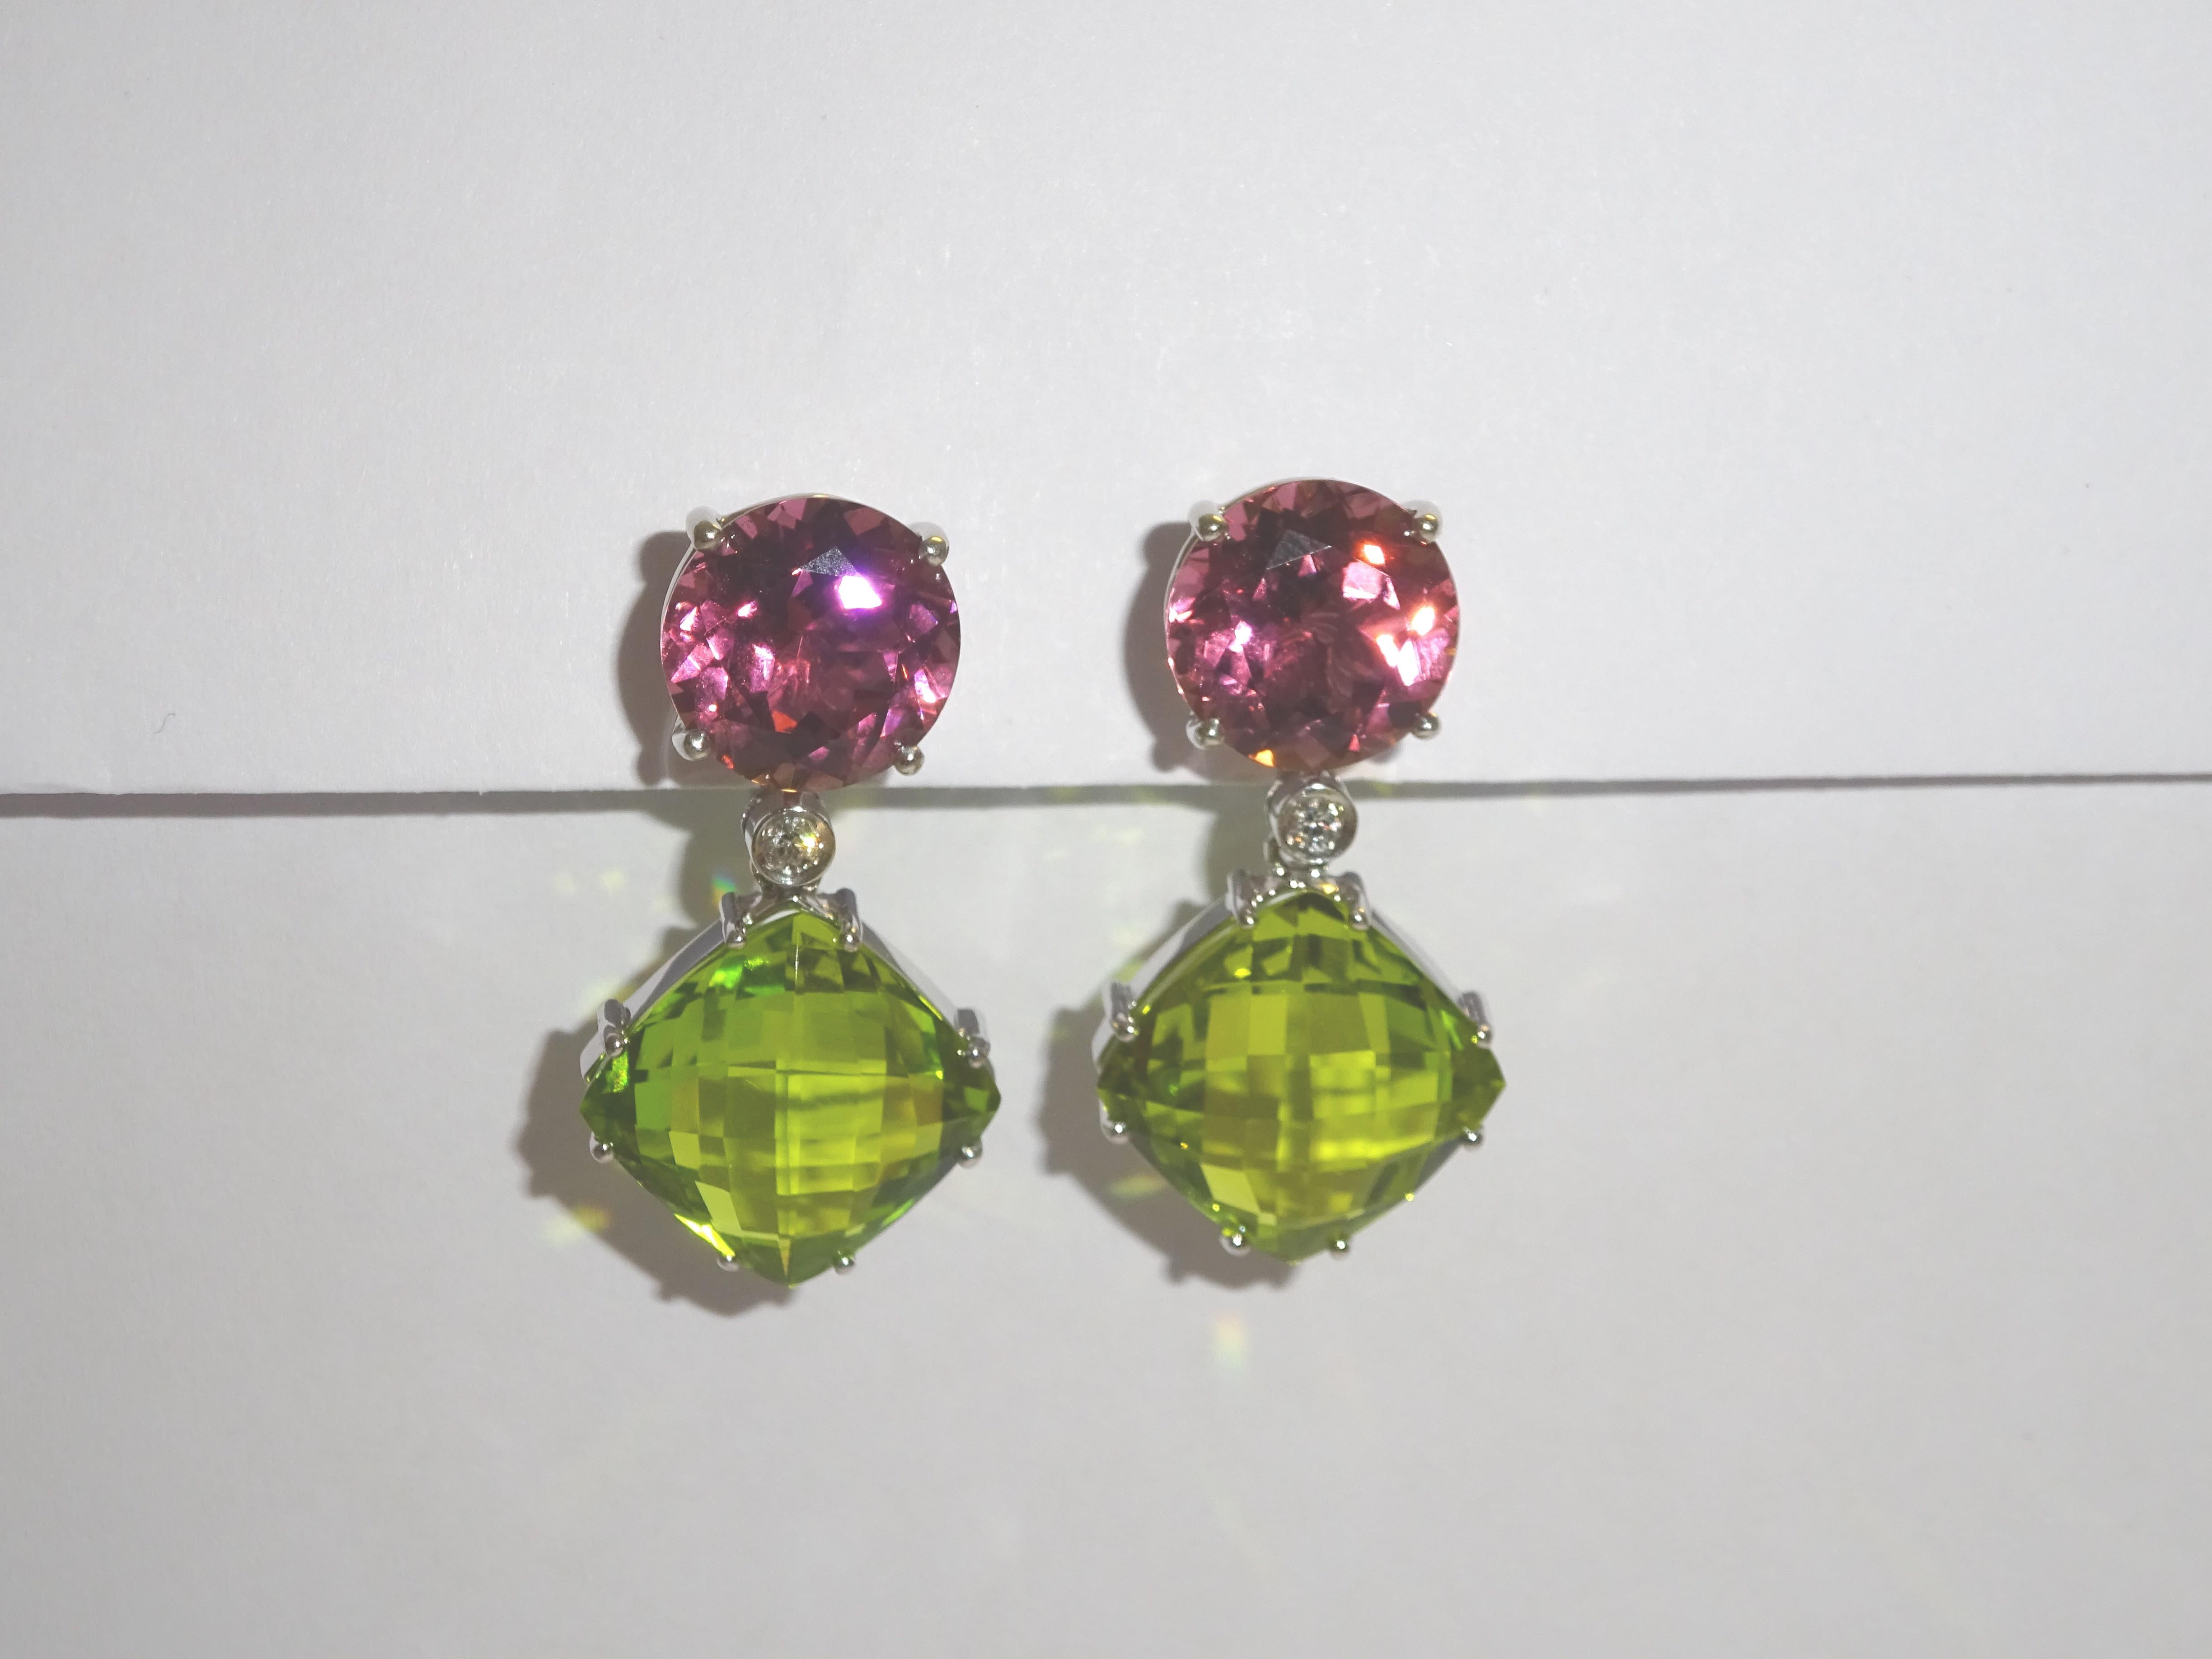 A magnificent pair of contemporary Diamond, Turmaline and Peridot drop Earrings. The earrings are mounted in 18 Karat white gold encrusted with vidid and truly stunning oval gemstones. These sensational earrings epitomize elegance and